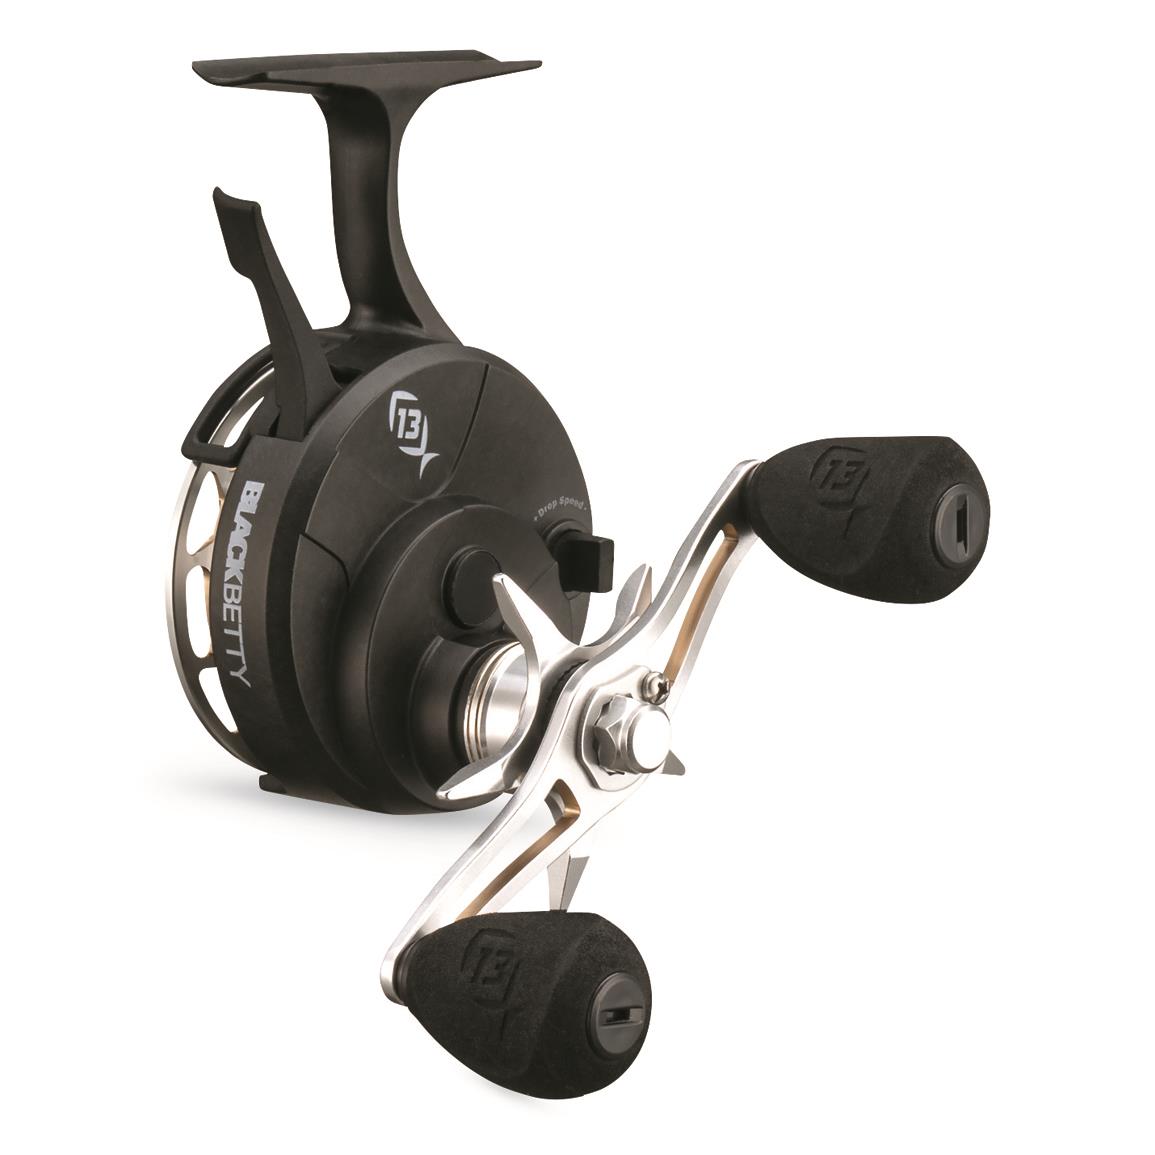 13 Fishing Descent Aluminum Inline Ice Fishing Reels - 735077, Ice Fishing  Reels at Sportsman's Guide